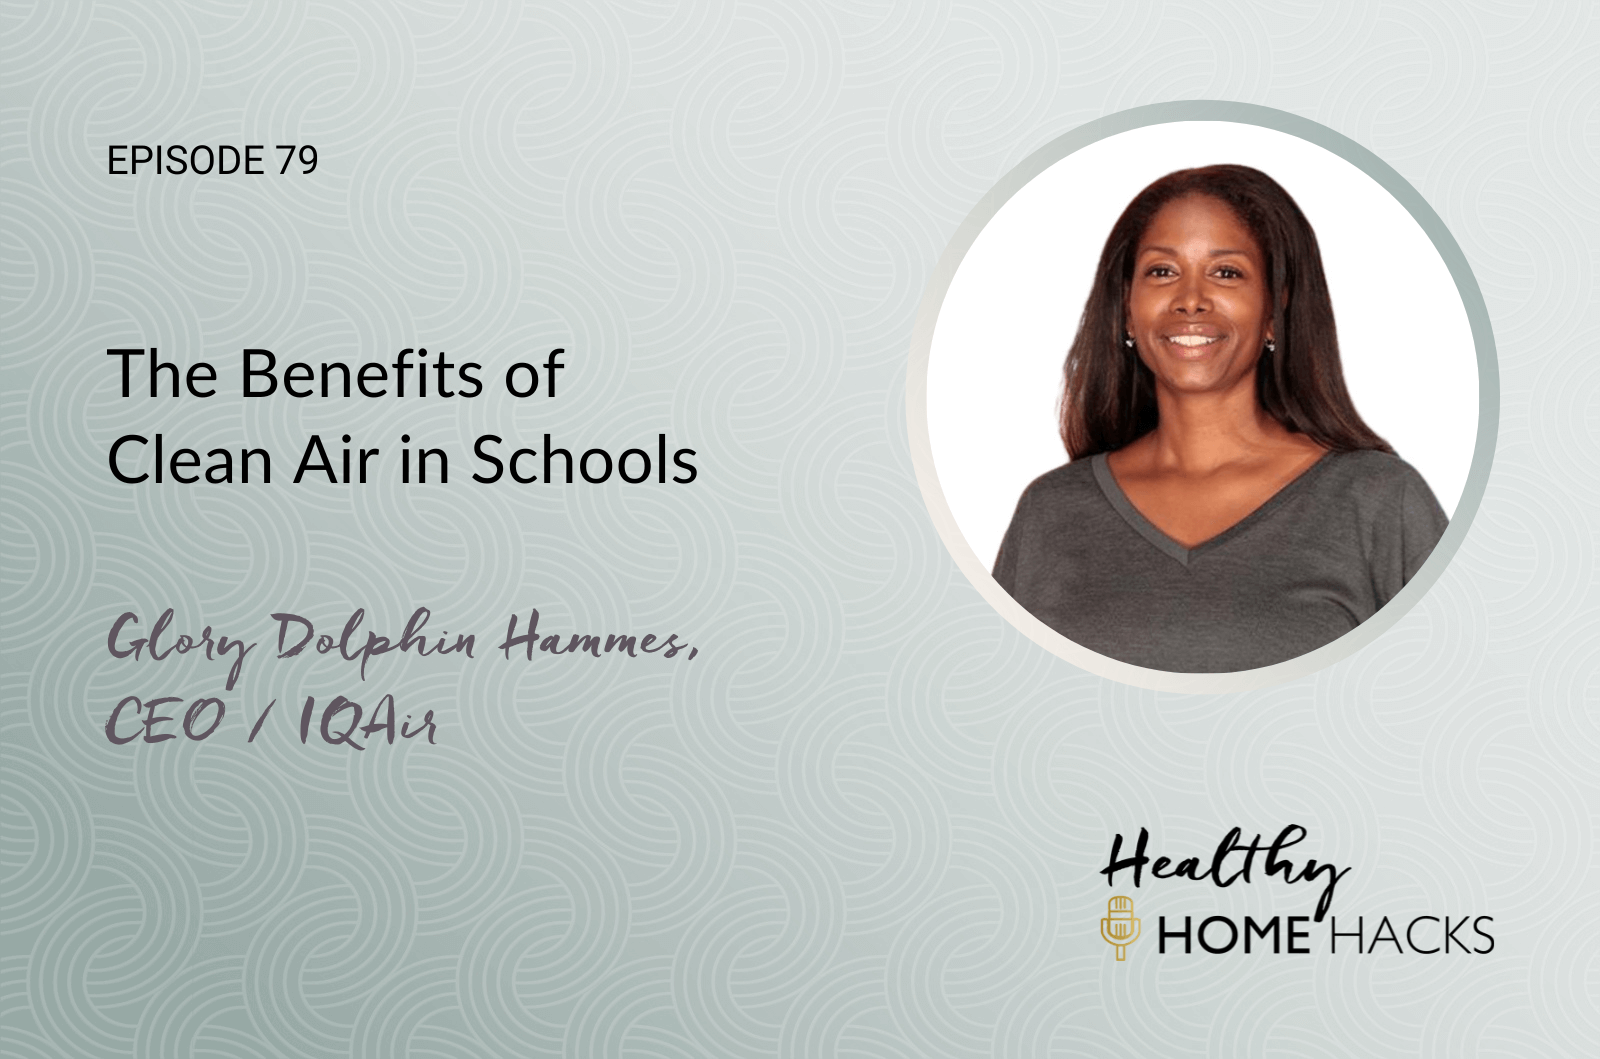 The Benefits of Clean Air in Schools